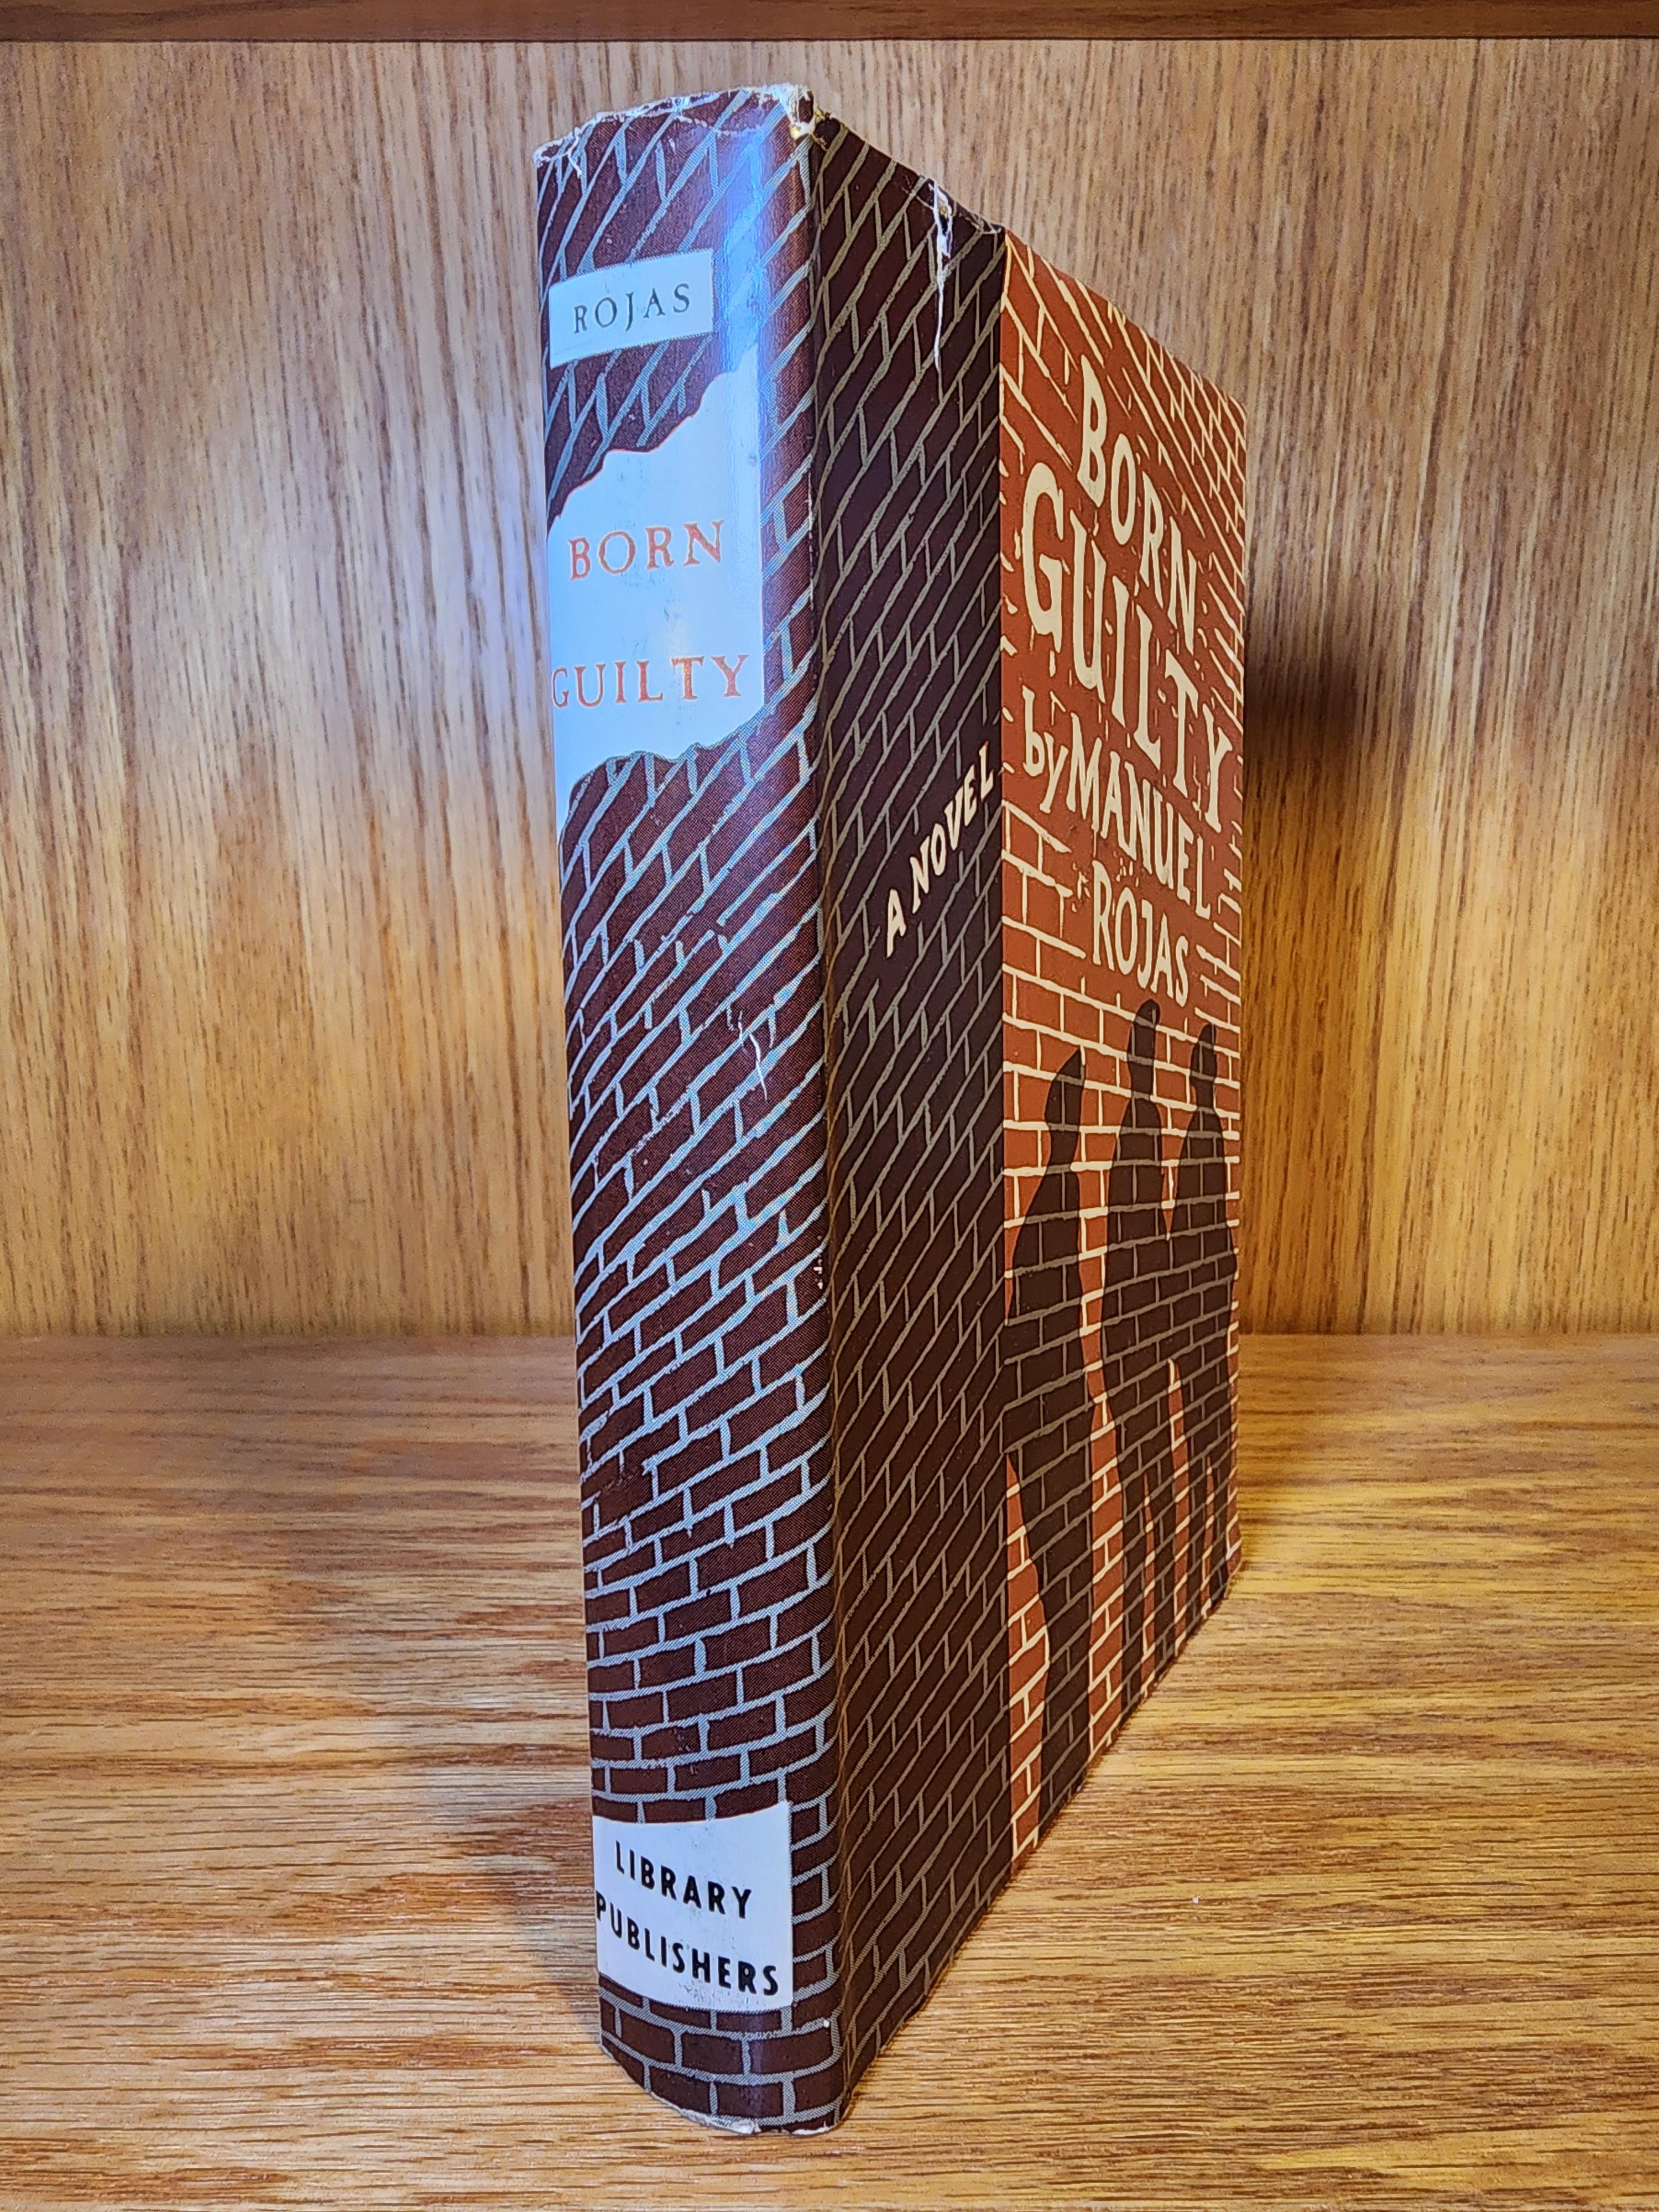 Born Guilty - Manuel Rojas, Translated by Frank Gaynor. First American Pressing, 1955 Hardcover, Hardcover